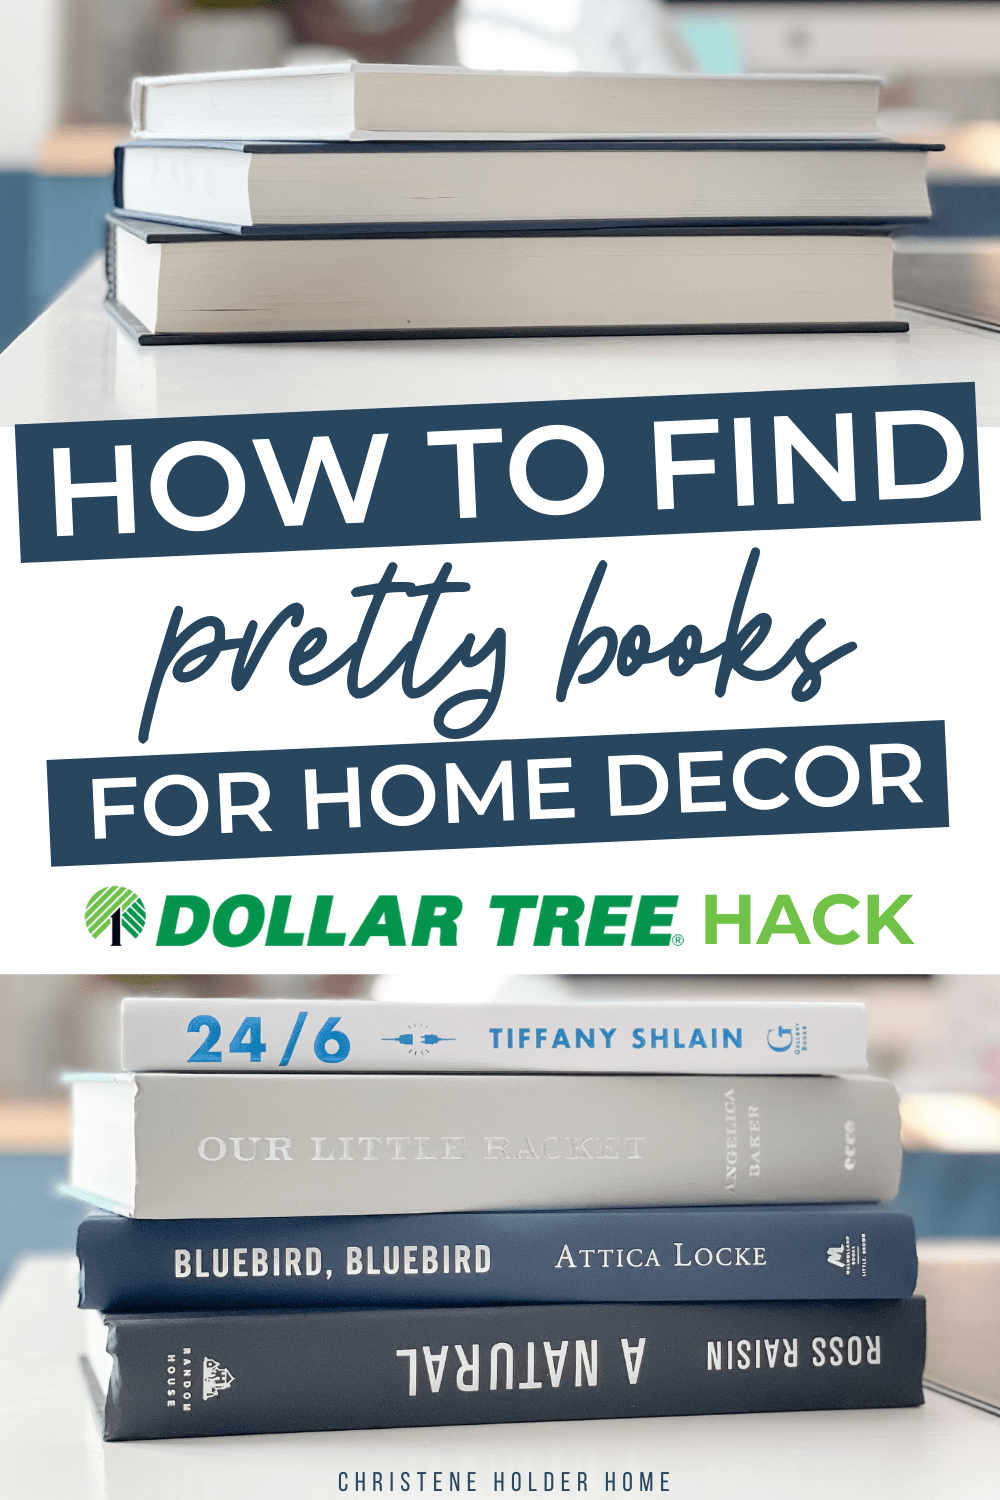 How to Find Pretty Books for Home Decor - Dollar Tree Hack ...